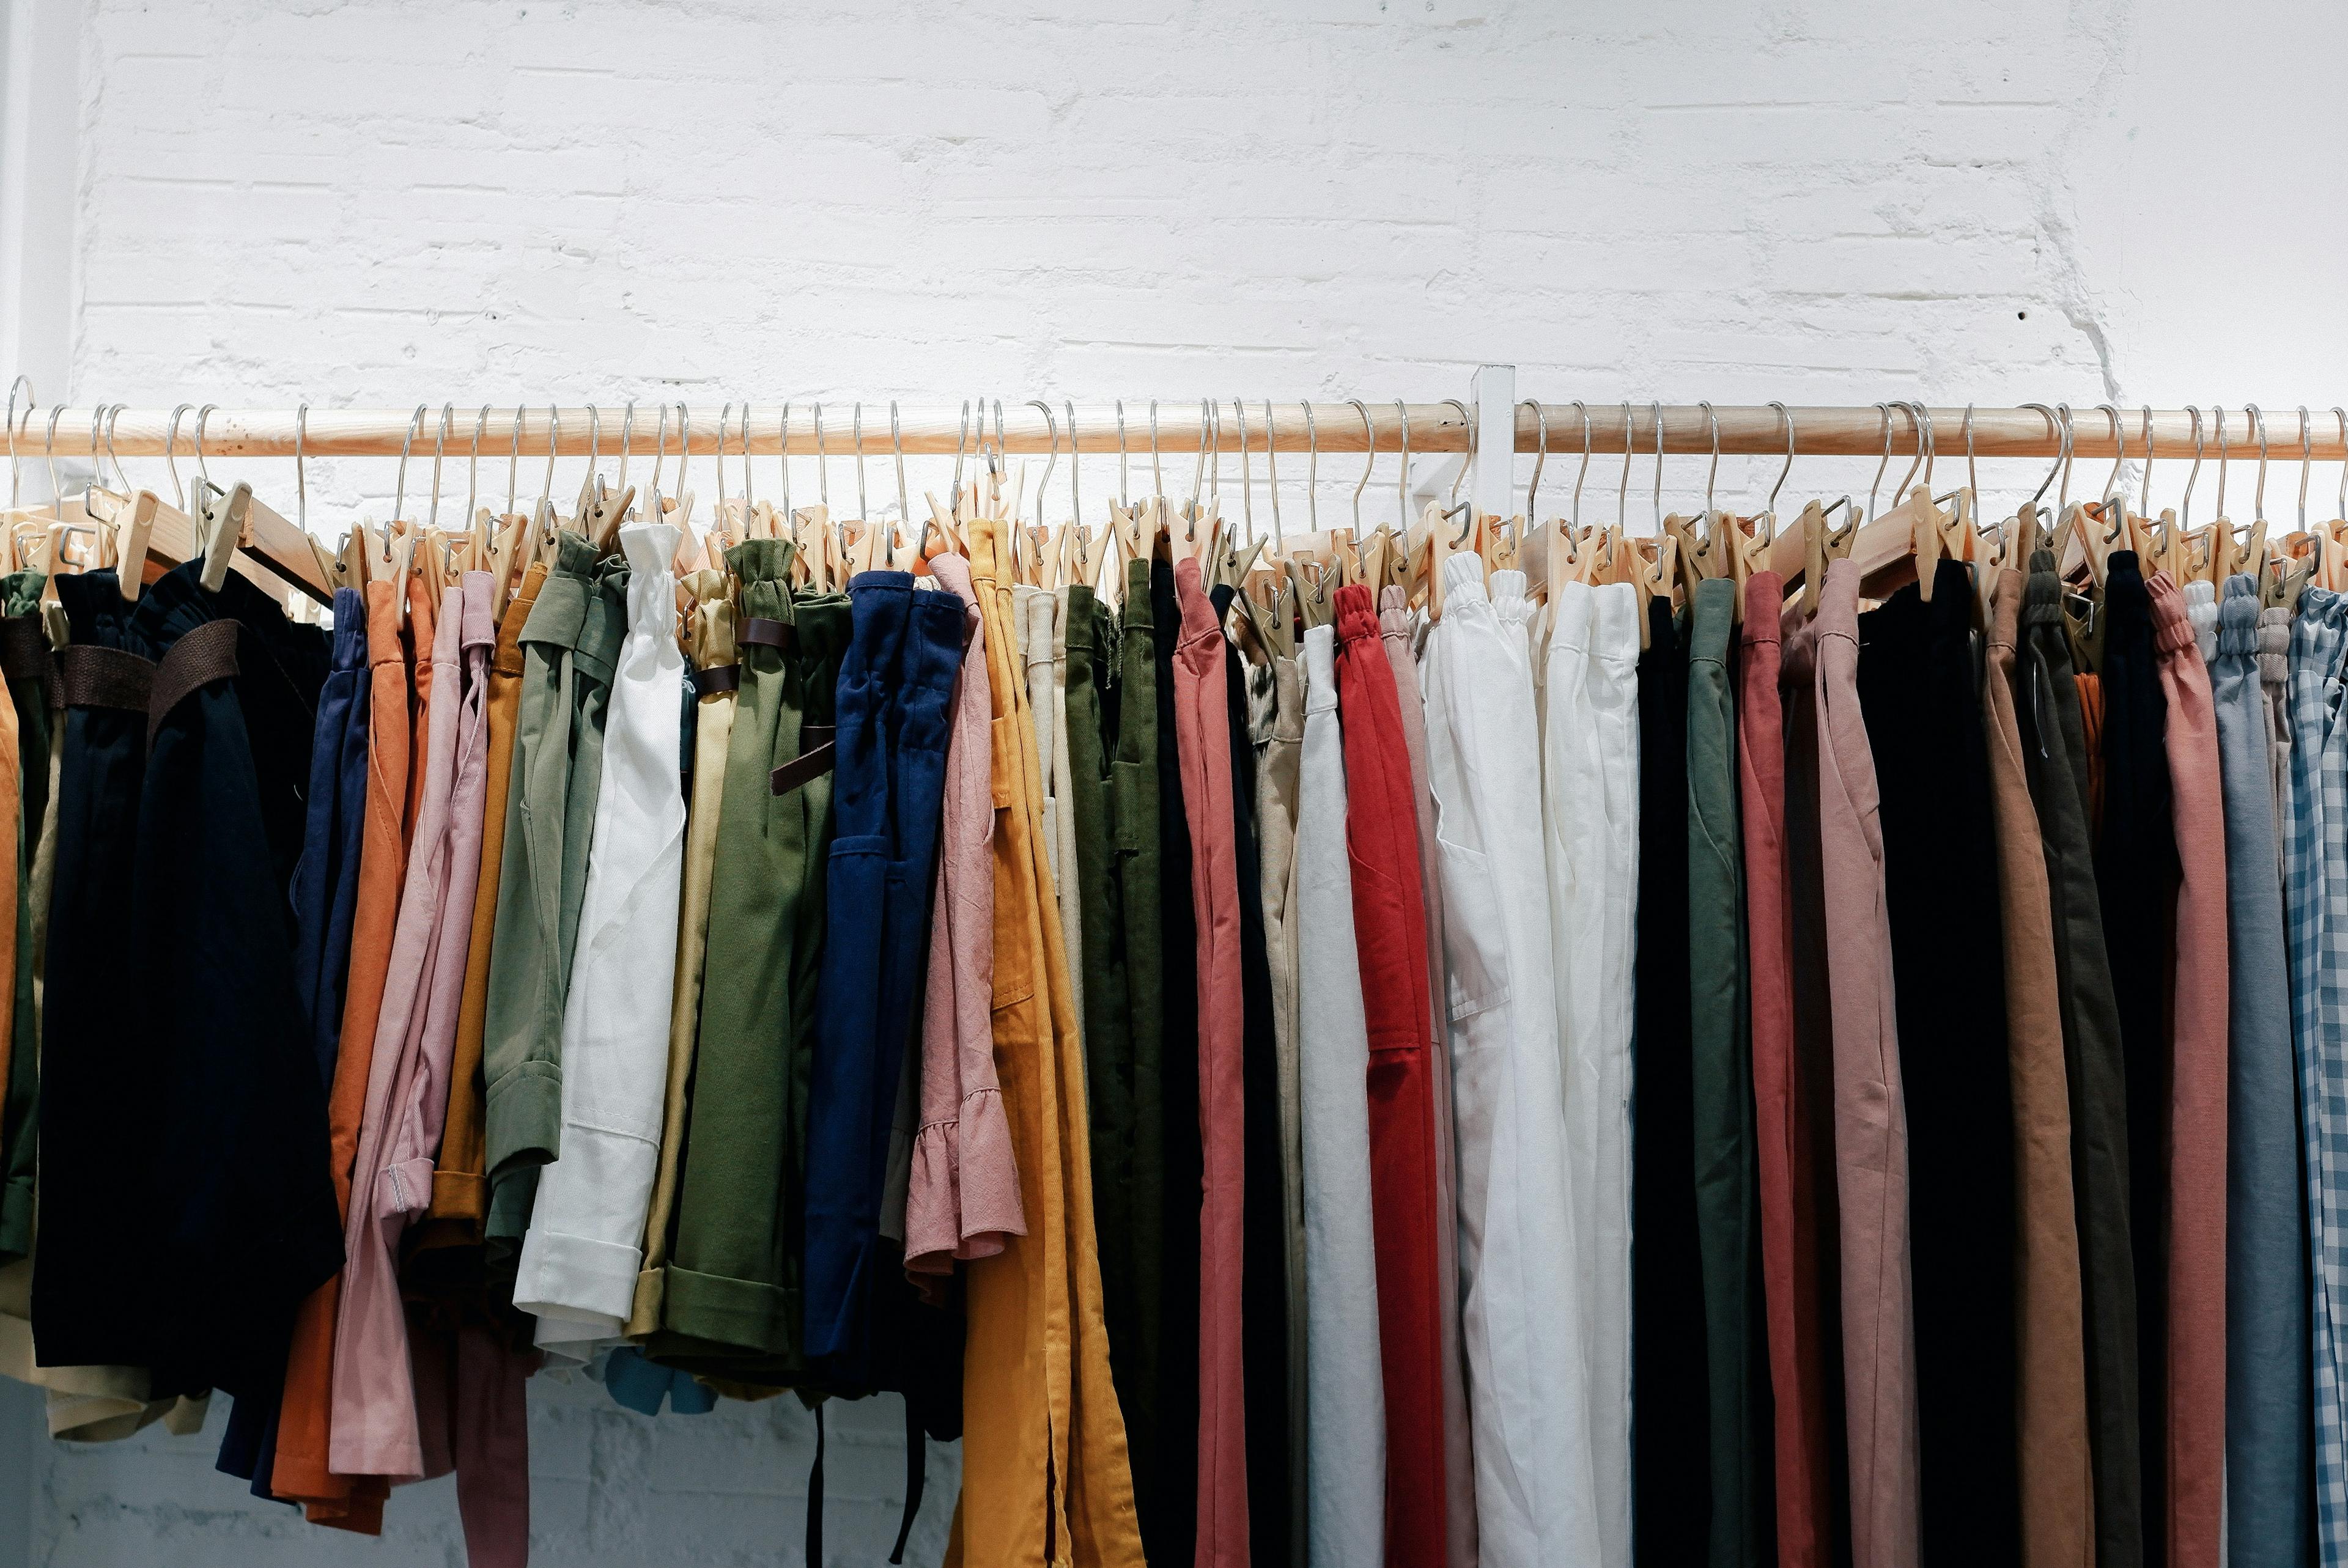 A large number of clothes hanging - background banner